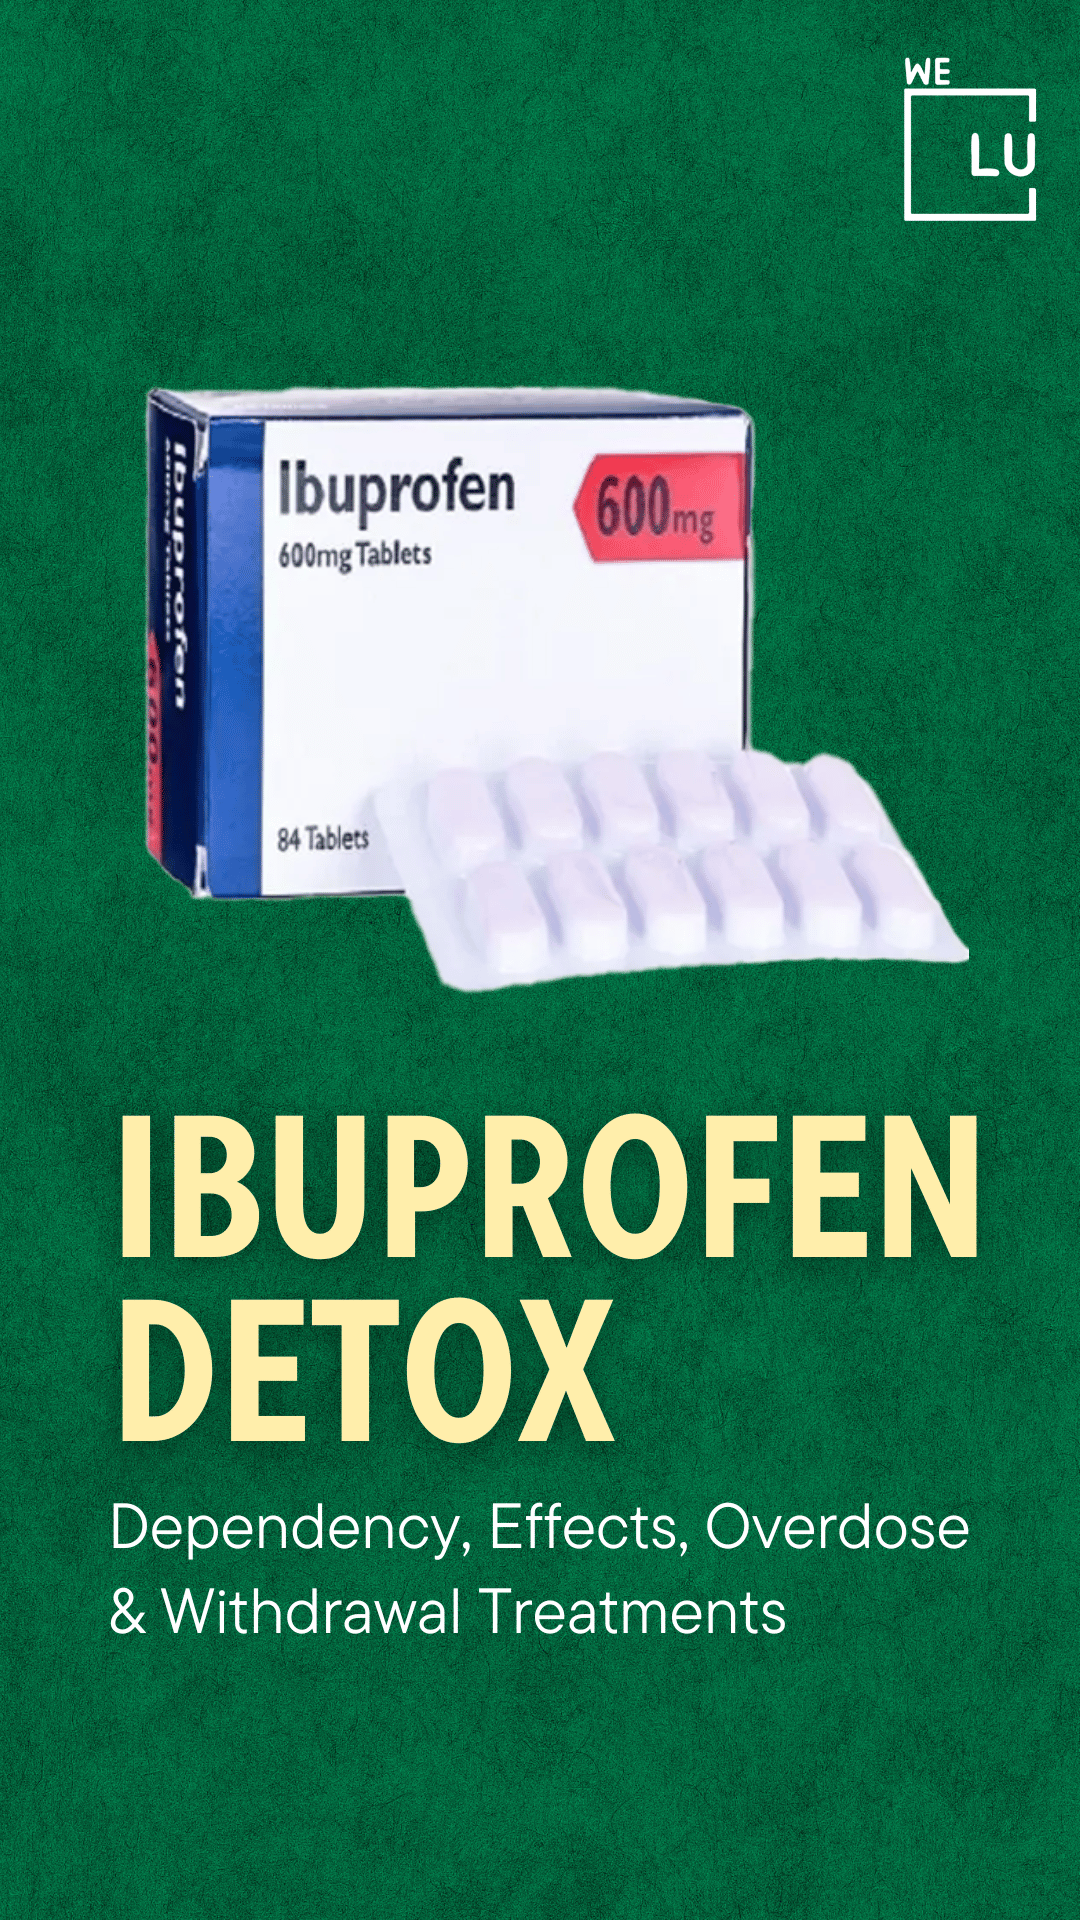 Ibuprofen is not ‘addictive’ in the physical sense, but there can certainly be a risk for psychological dependency when the drug is combined with others or alcohol. You can get help by getting into ibuprofen detox with professional support to guide you through quitting the drug.